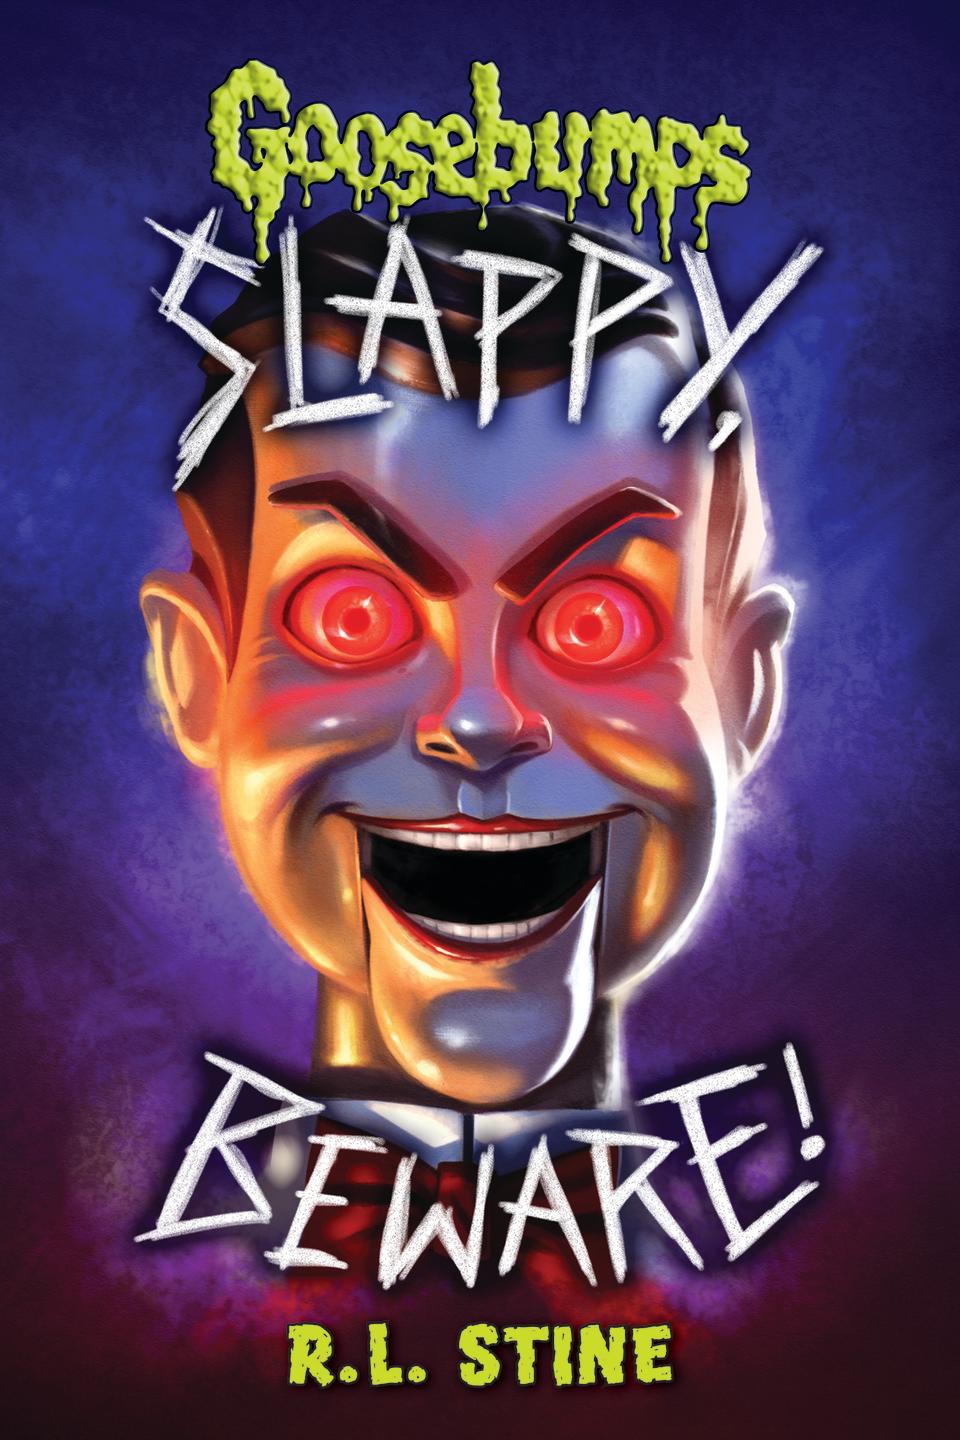 On Sept. 20, Scholastic will publish Slappy, Beware!, an origin story about the evil ventriloquist dummy. - Credit: Scholastic